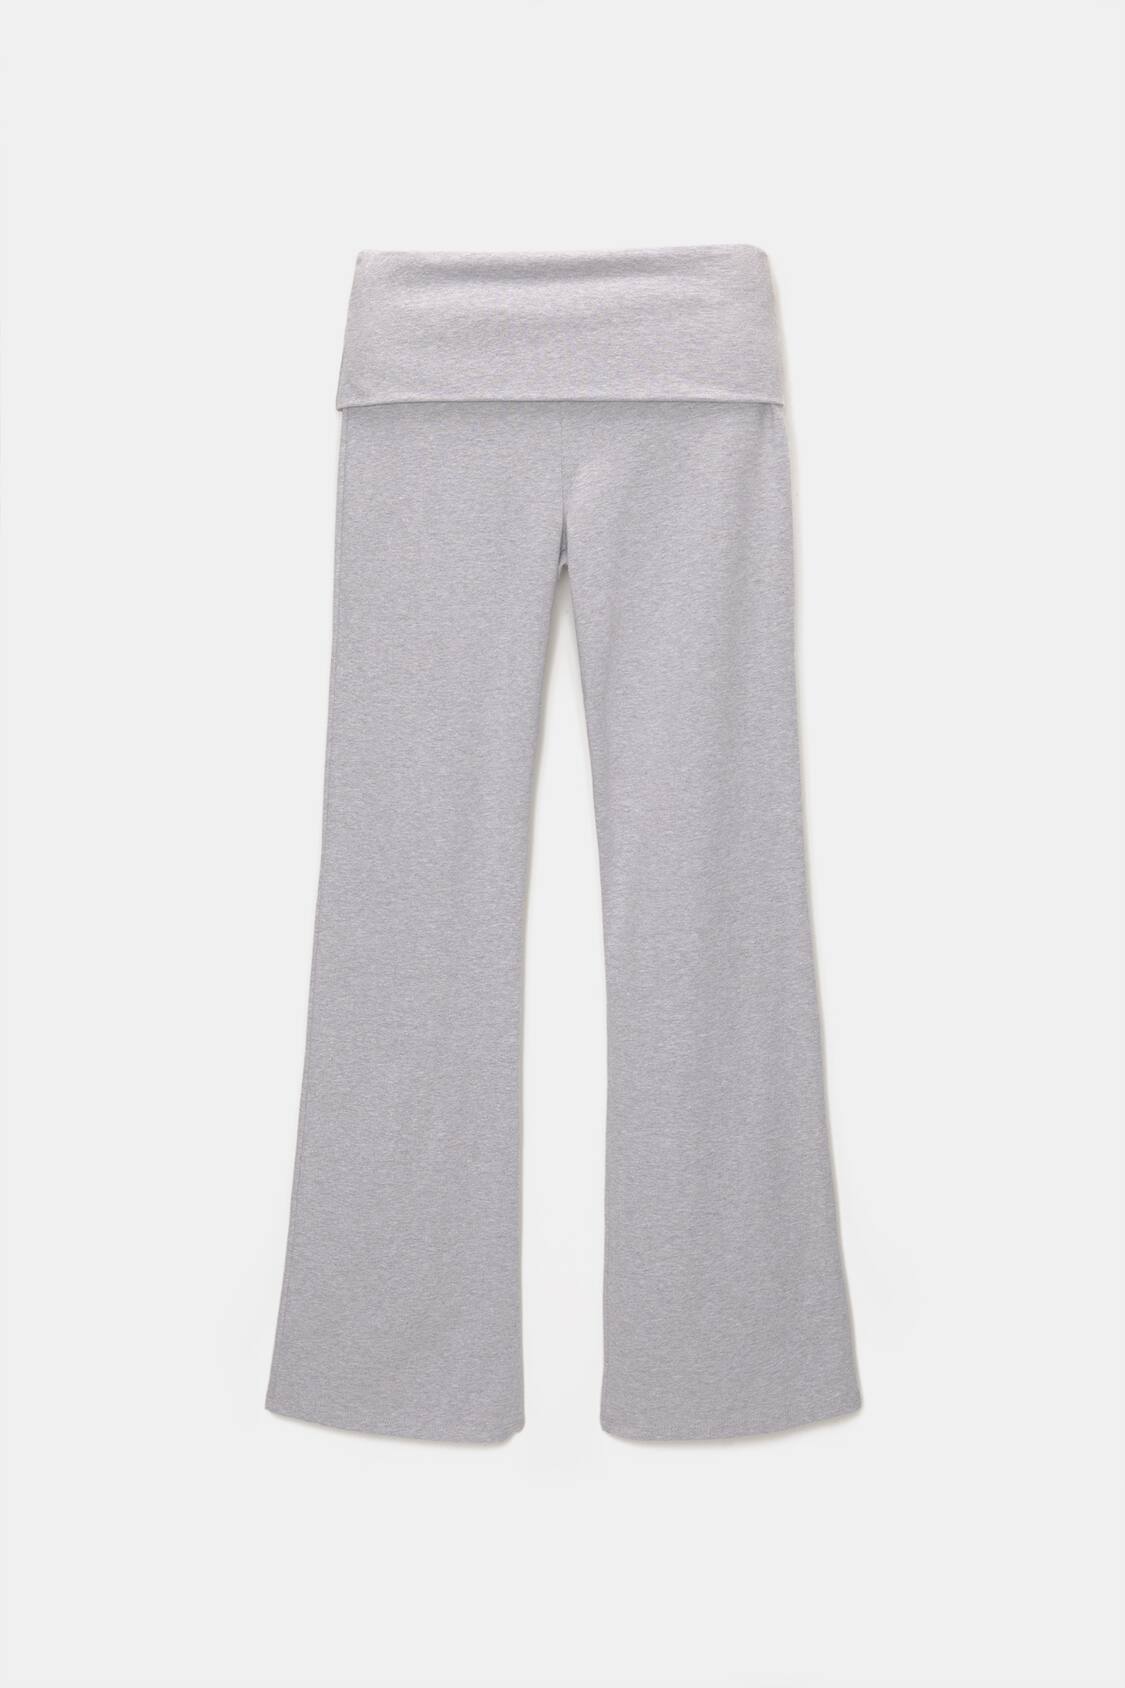 Petite Grey Marl Fold Over Flared Pants